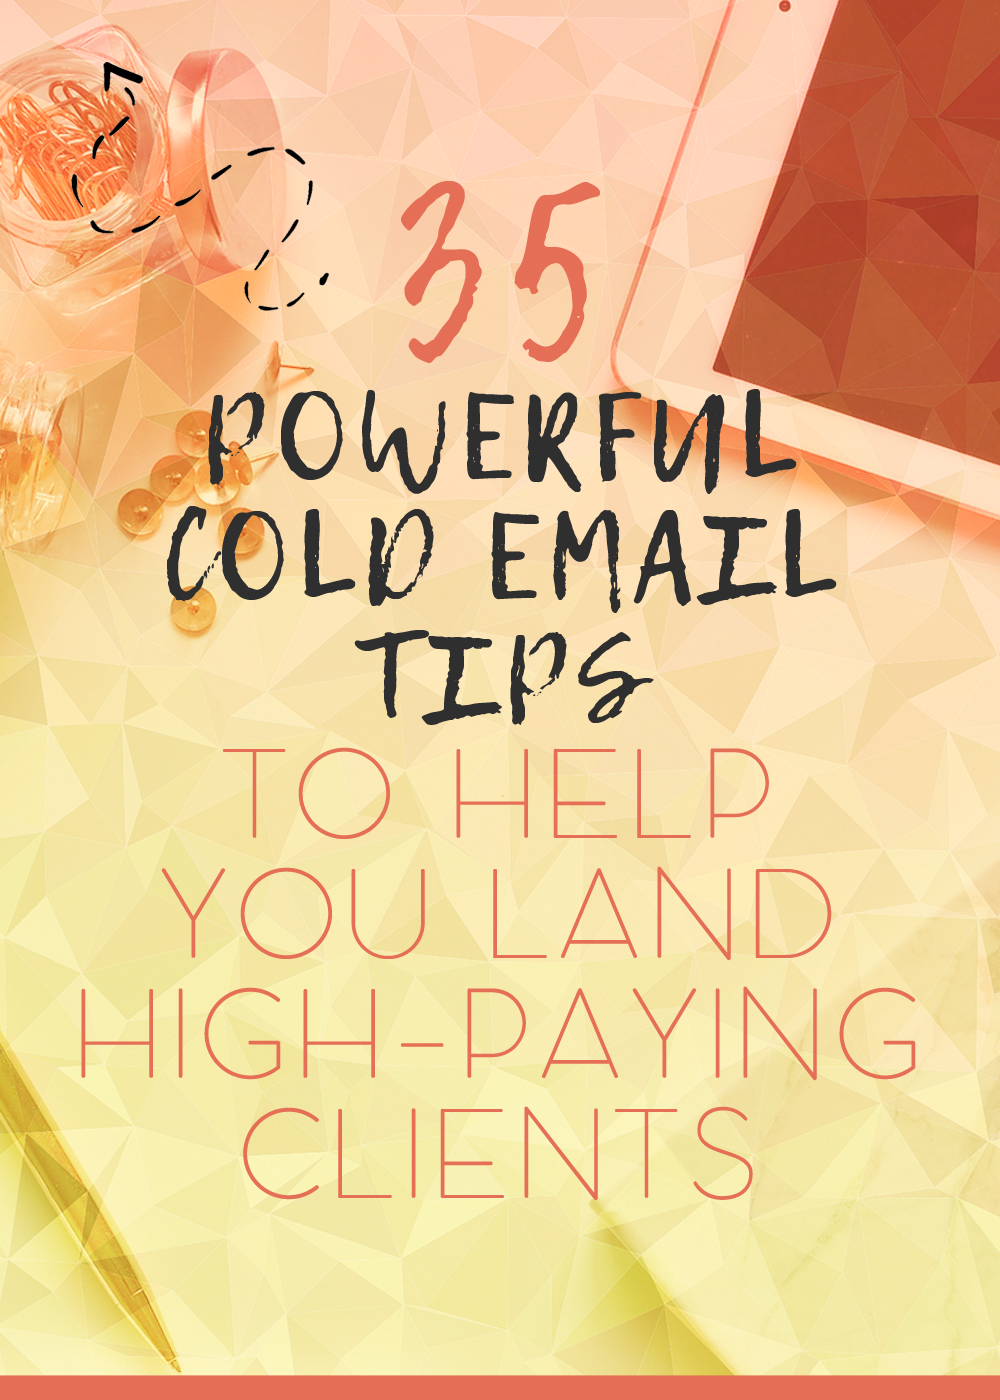 These powerful cold email tips will help make writing cold emails a walk in the park - and ten times more successful! 